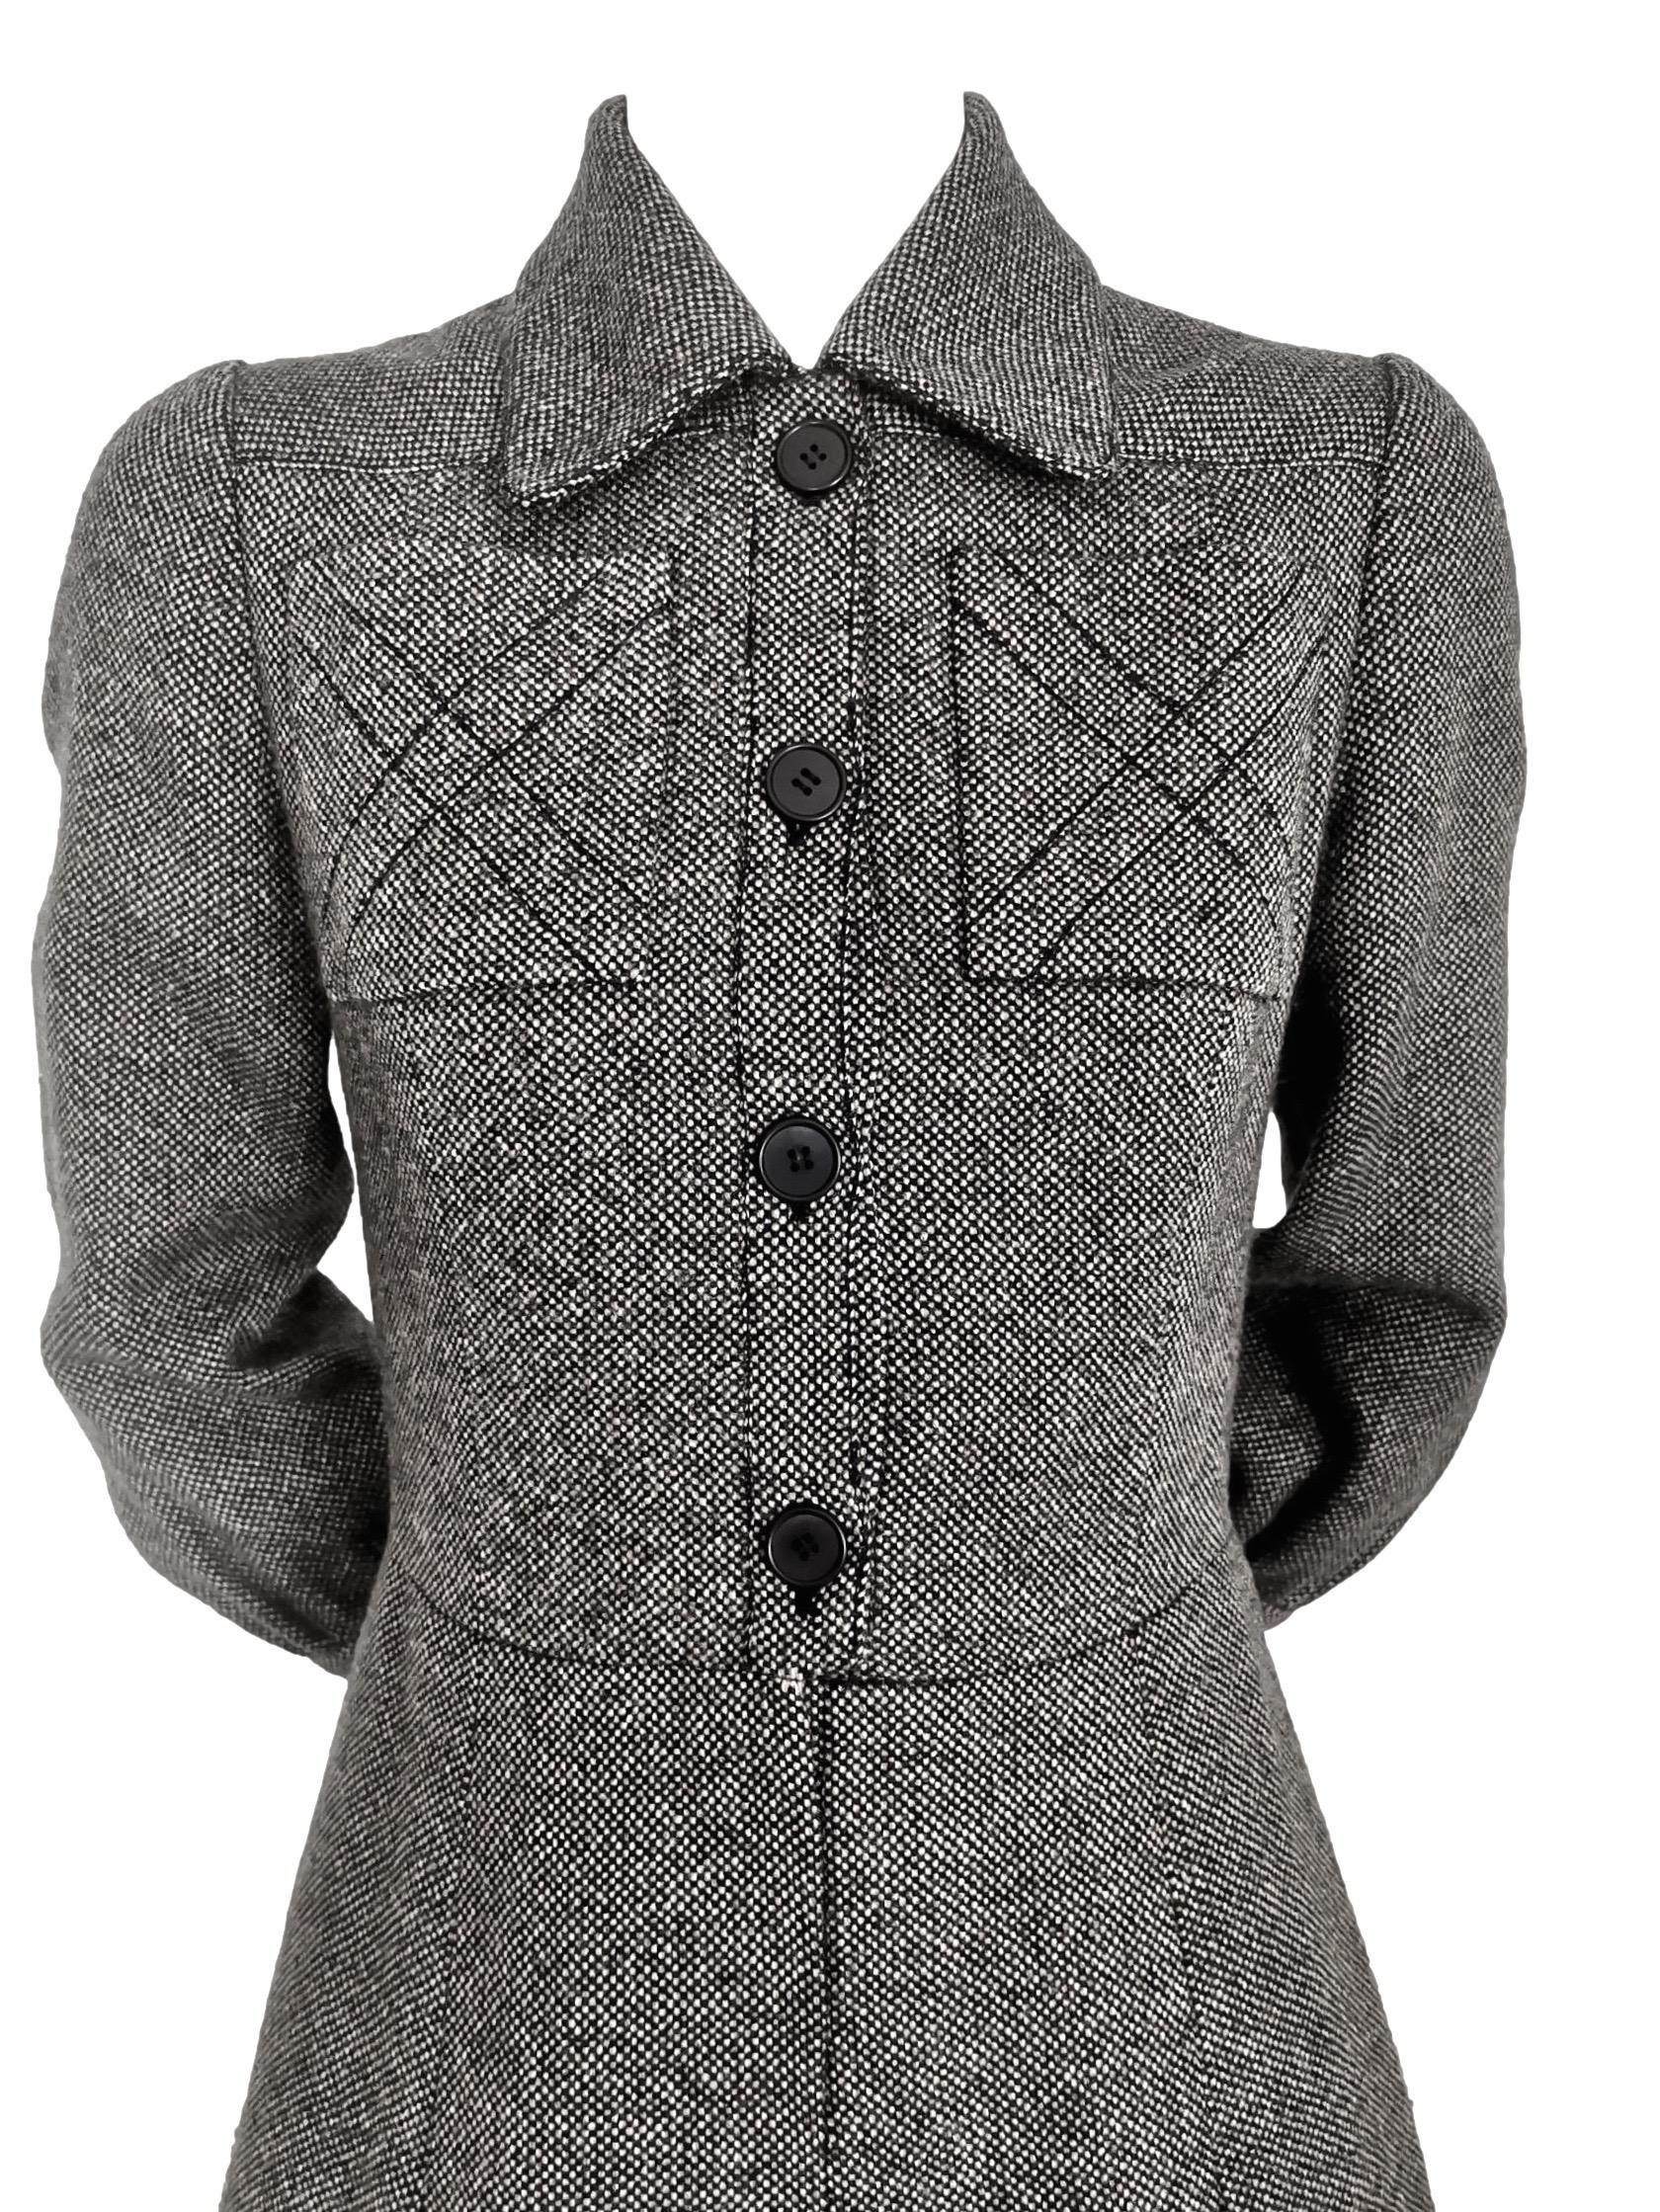 Jean Patou Boutique
by Karl Lagerfeld

Wool Tweed Fitted Box Pleat Dress

No Size Label
34 Inch Chest
30 Inch Waist